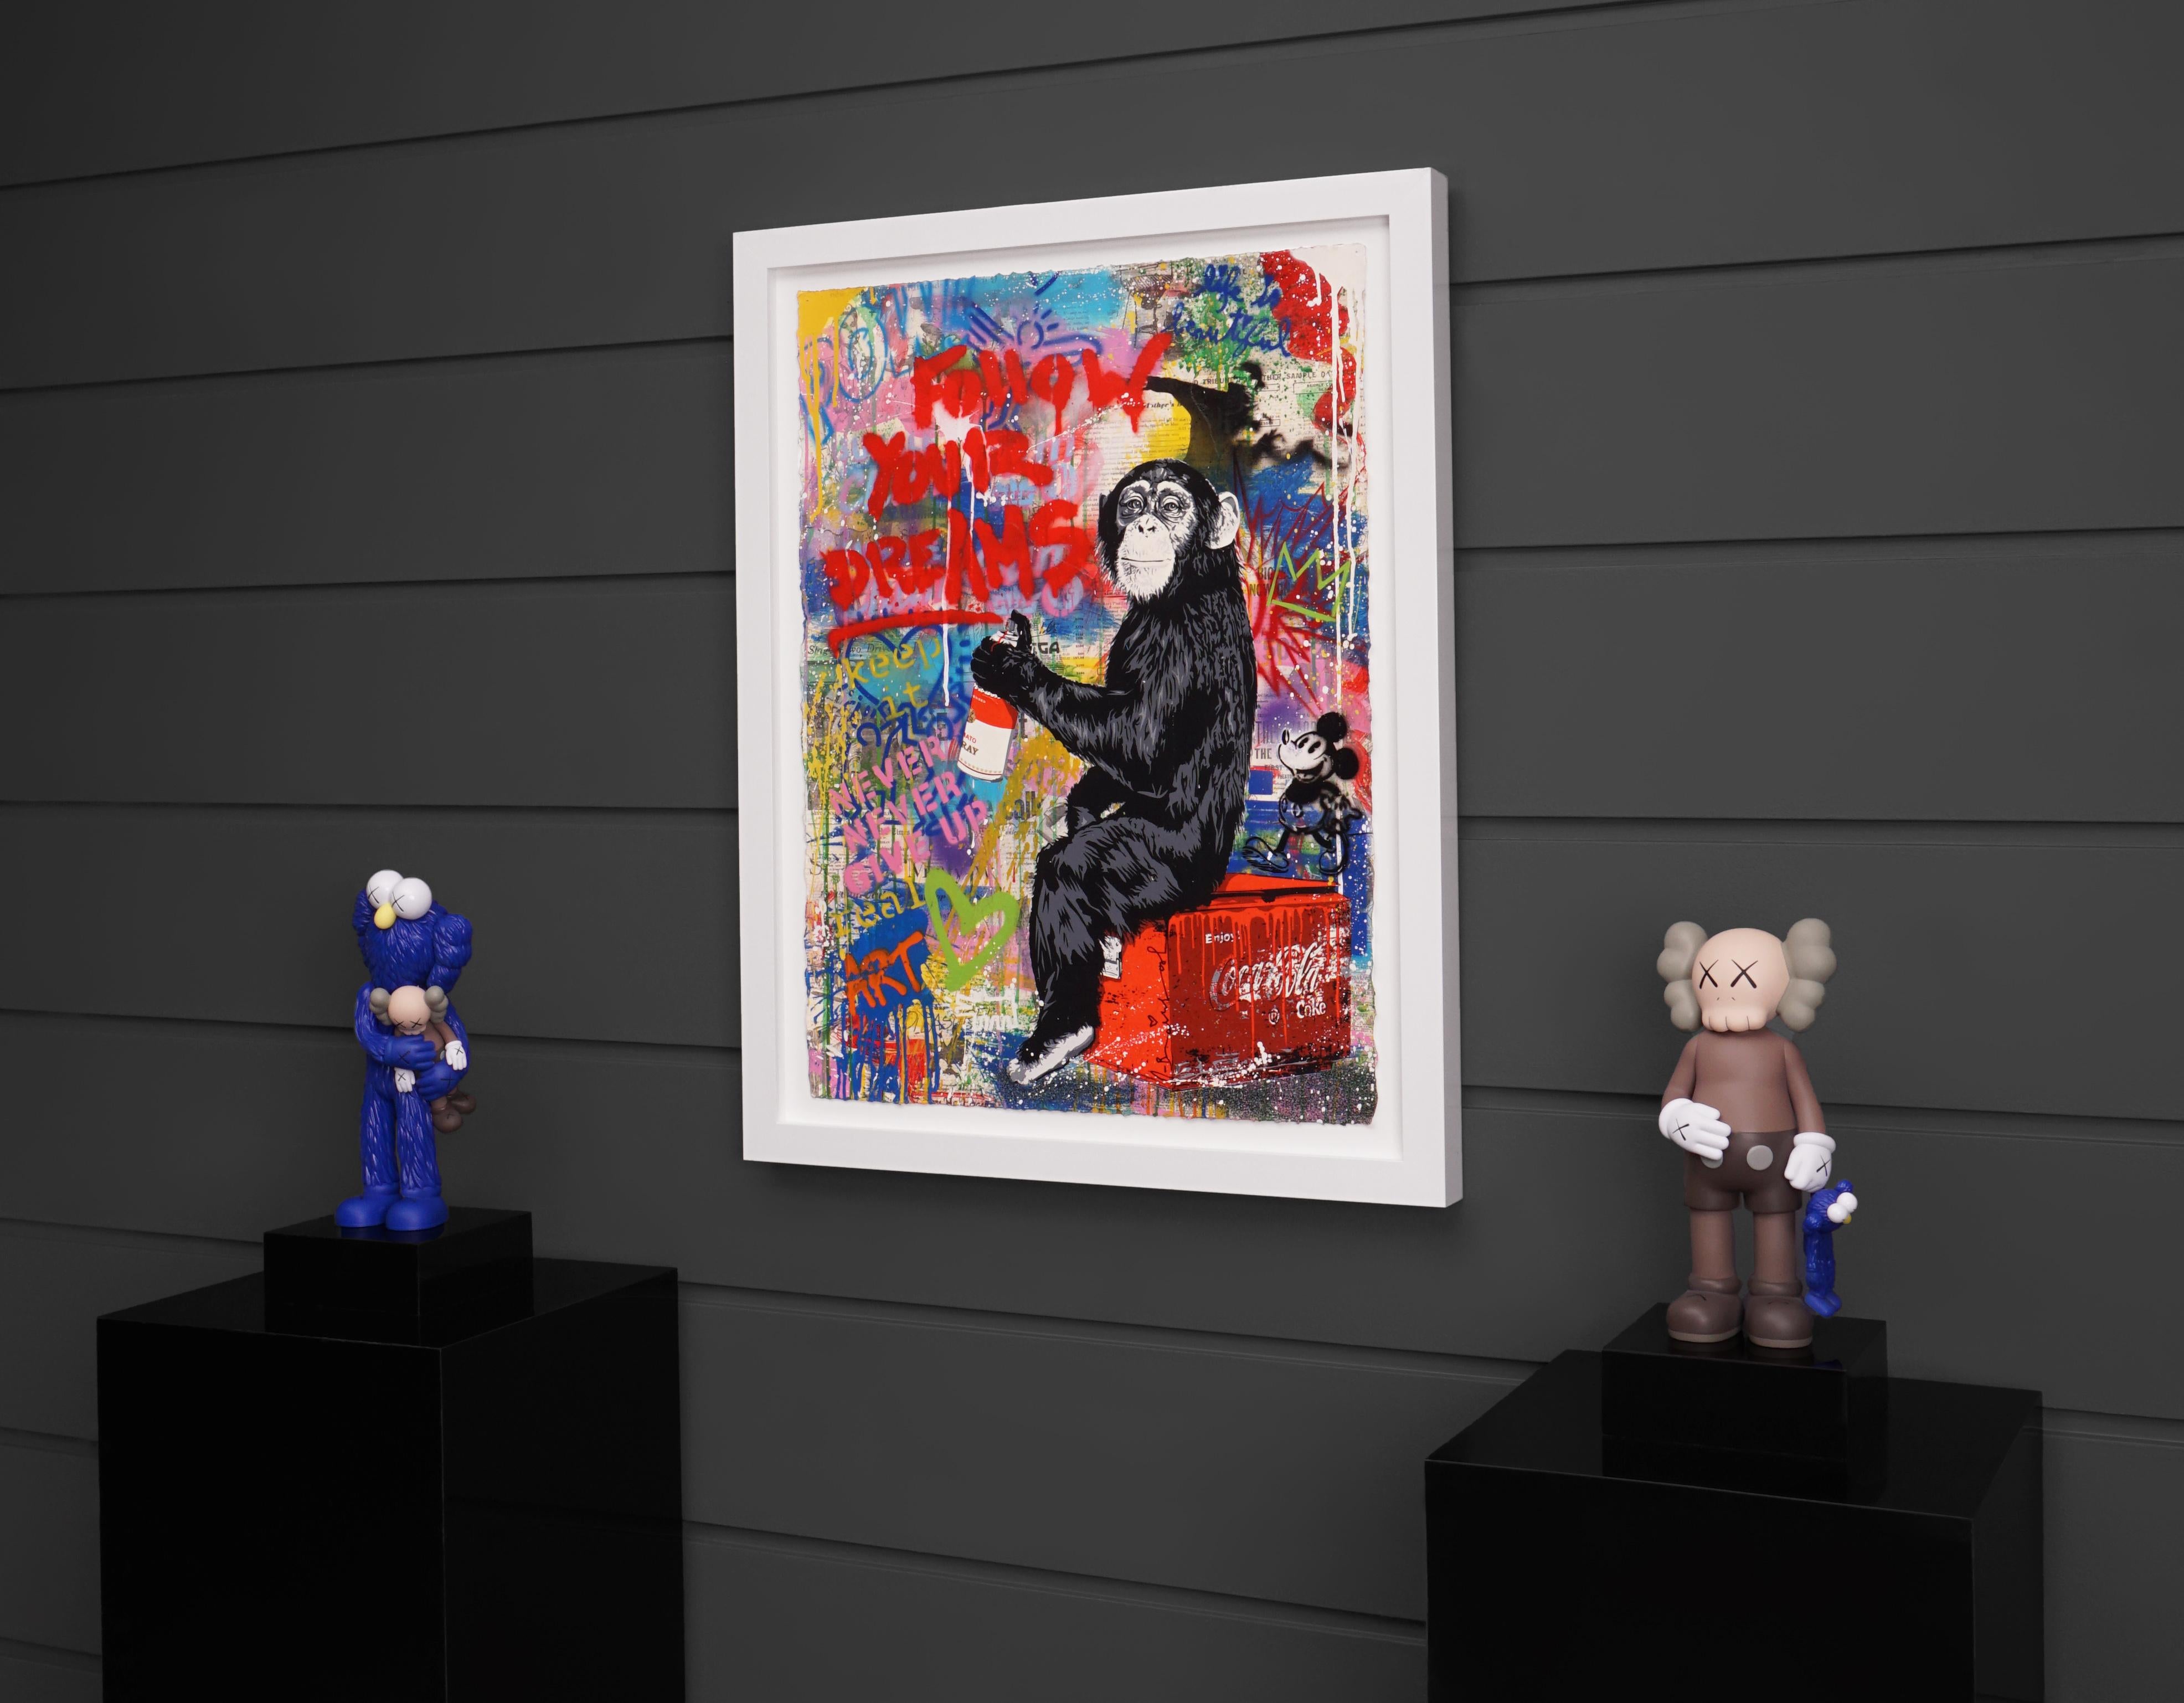 The 'Follow Your Dreams’ is a mixed media painting on paper by Mr. Brainwash. Created in 2020, this specific piece was chosen for it’s incredible depth, color choice and dynamic layered imagery. Mr. Brainwash, known for his street-style contemporary